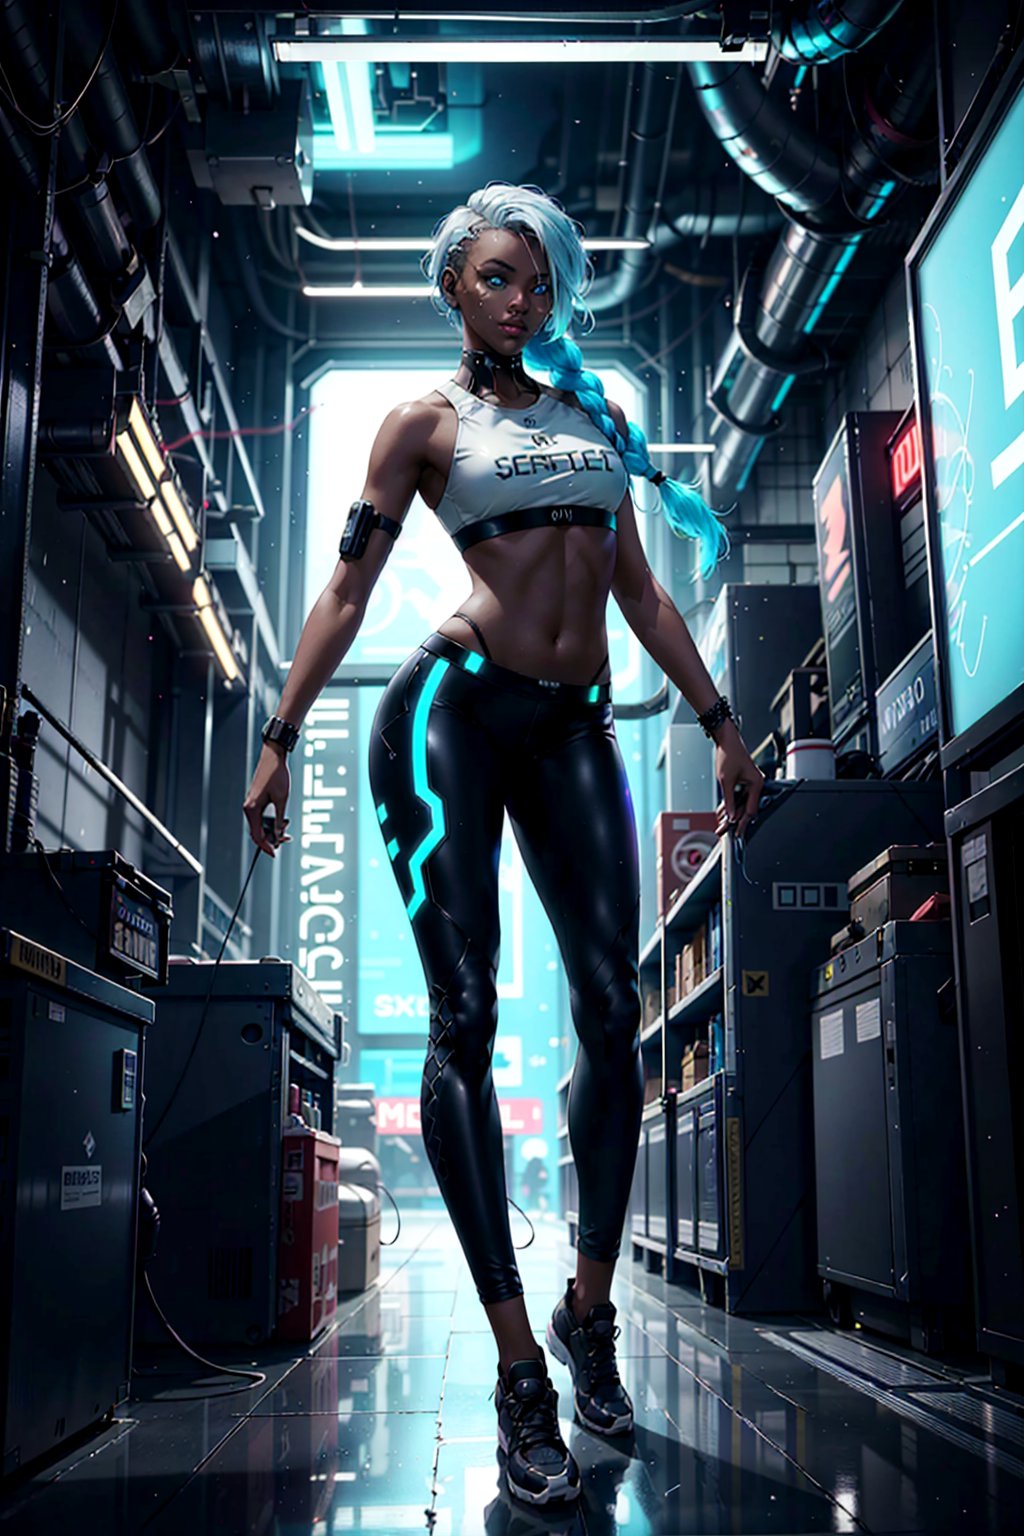 full body,1girl, 13years old, white foxtail Hair all the way to the ground, Heroic attitude, cyberpunk setting, Bounty Hunter, beautiful athletic body, dark brown skin color, small breast, wearing tight pants and top, glowing Turquoise blue eyes, braided white hair, braided, athletic, volumetric lighting, best quality, masterpiece, realistic,drow,cyberpunk,Neon Light,beautiful_lolita_girl